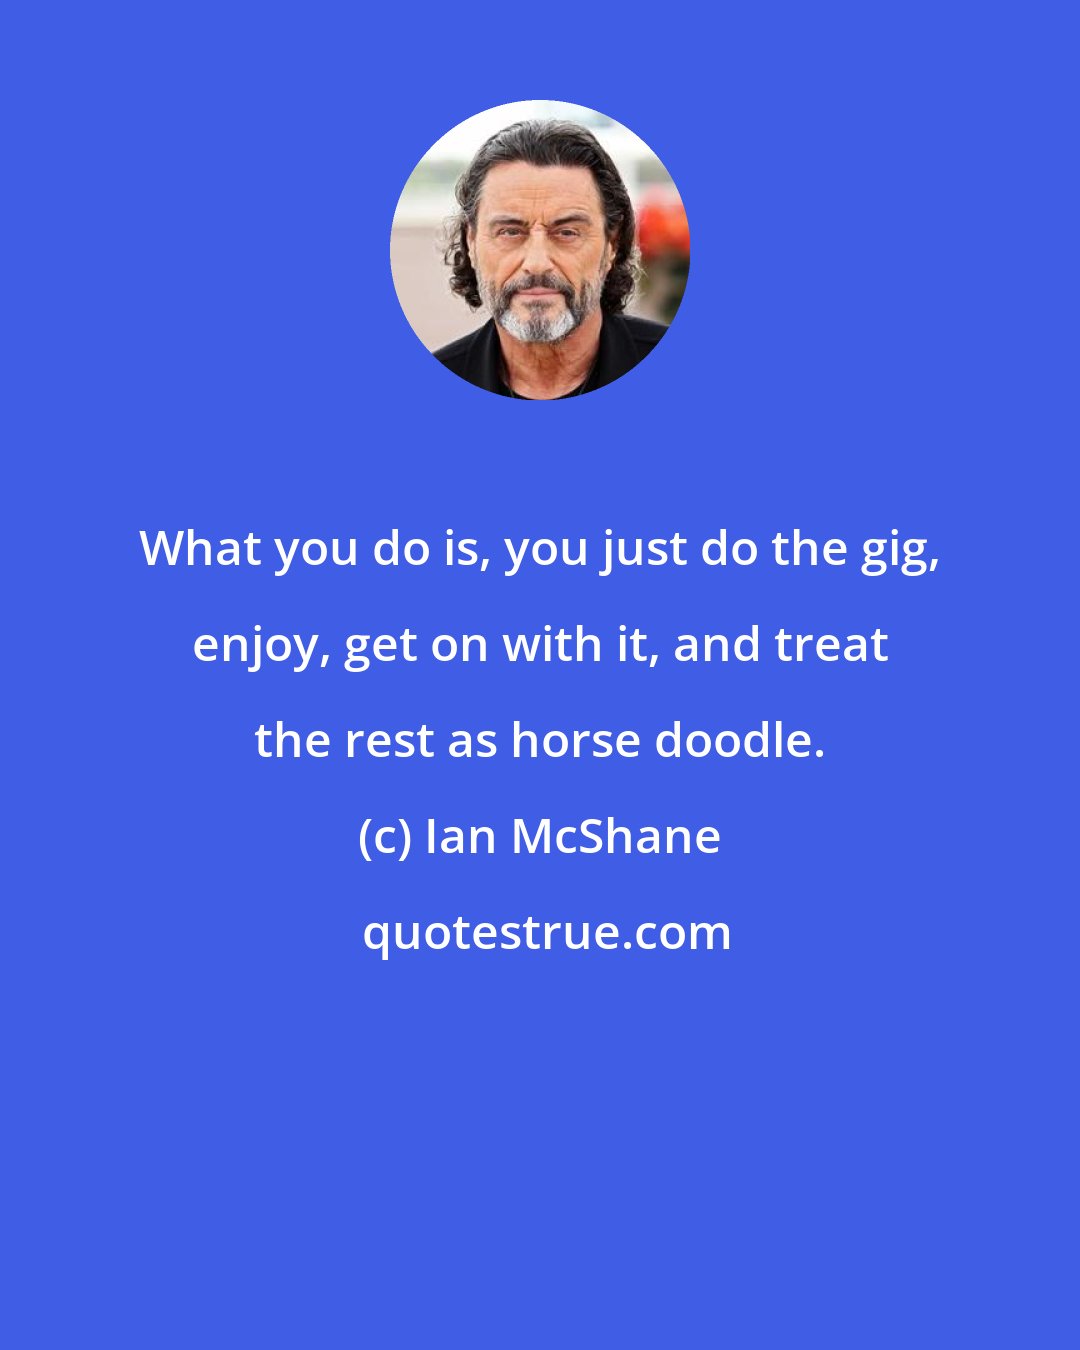 Ian McShane: What you do is, you just do the gig, enjoy, get on with it, and treat the rest as horse doodle.